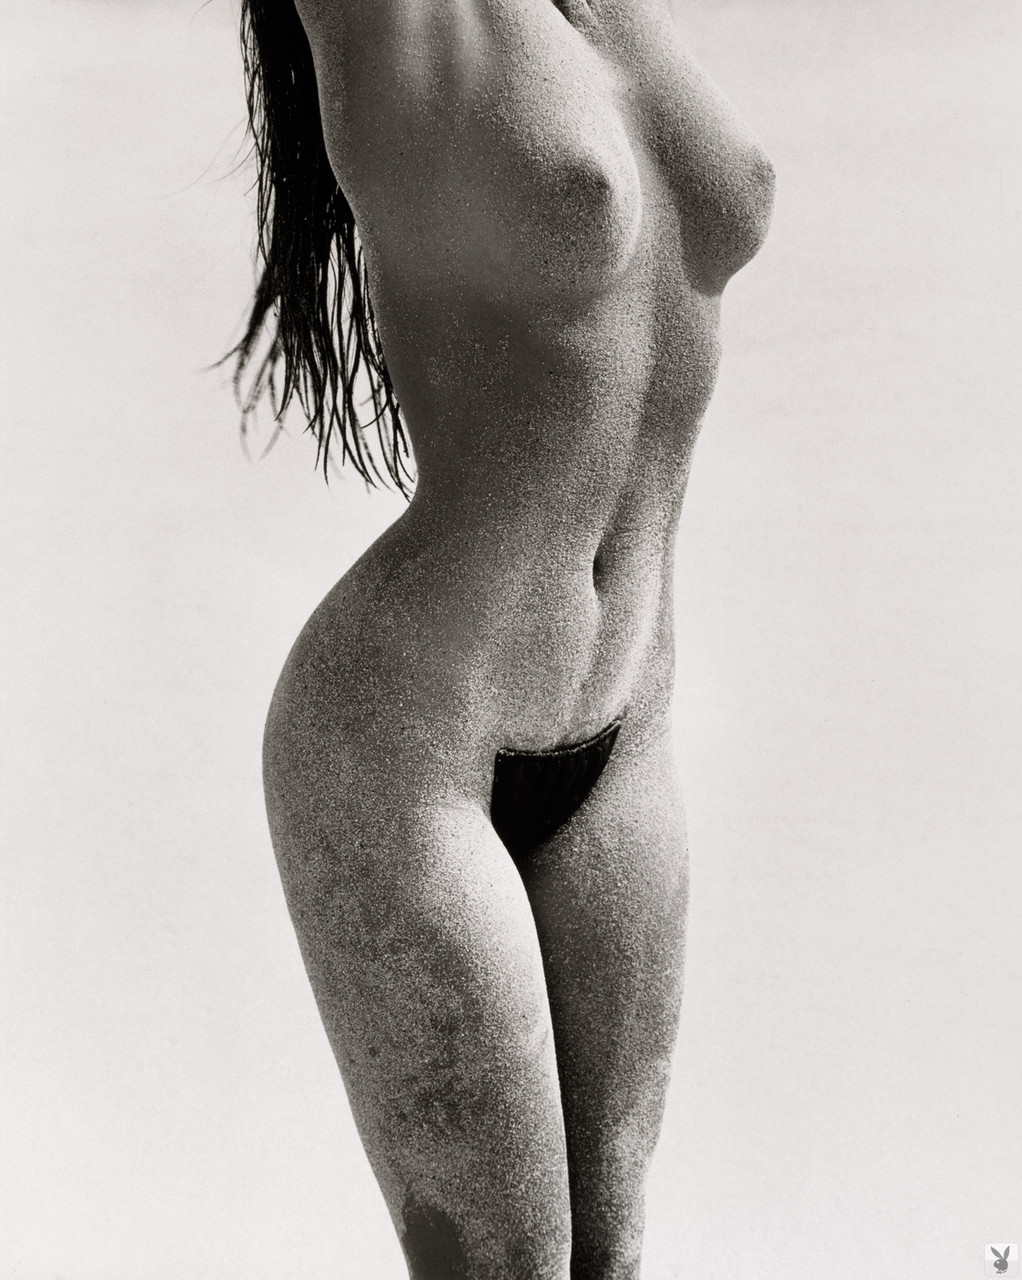 Sexy celebrity Cindy Crawford posing naked for the black and white photo shoot ポルノ写真 #423810475 | Playboy Plus Pics, Cindy Crawford, Centerfold, モバイルポルノ